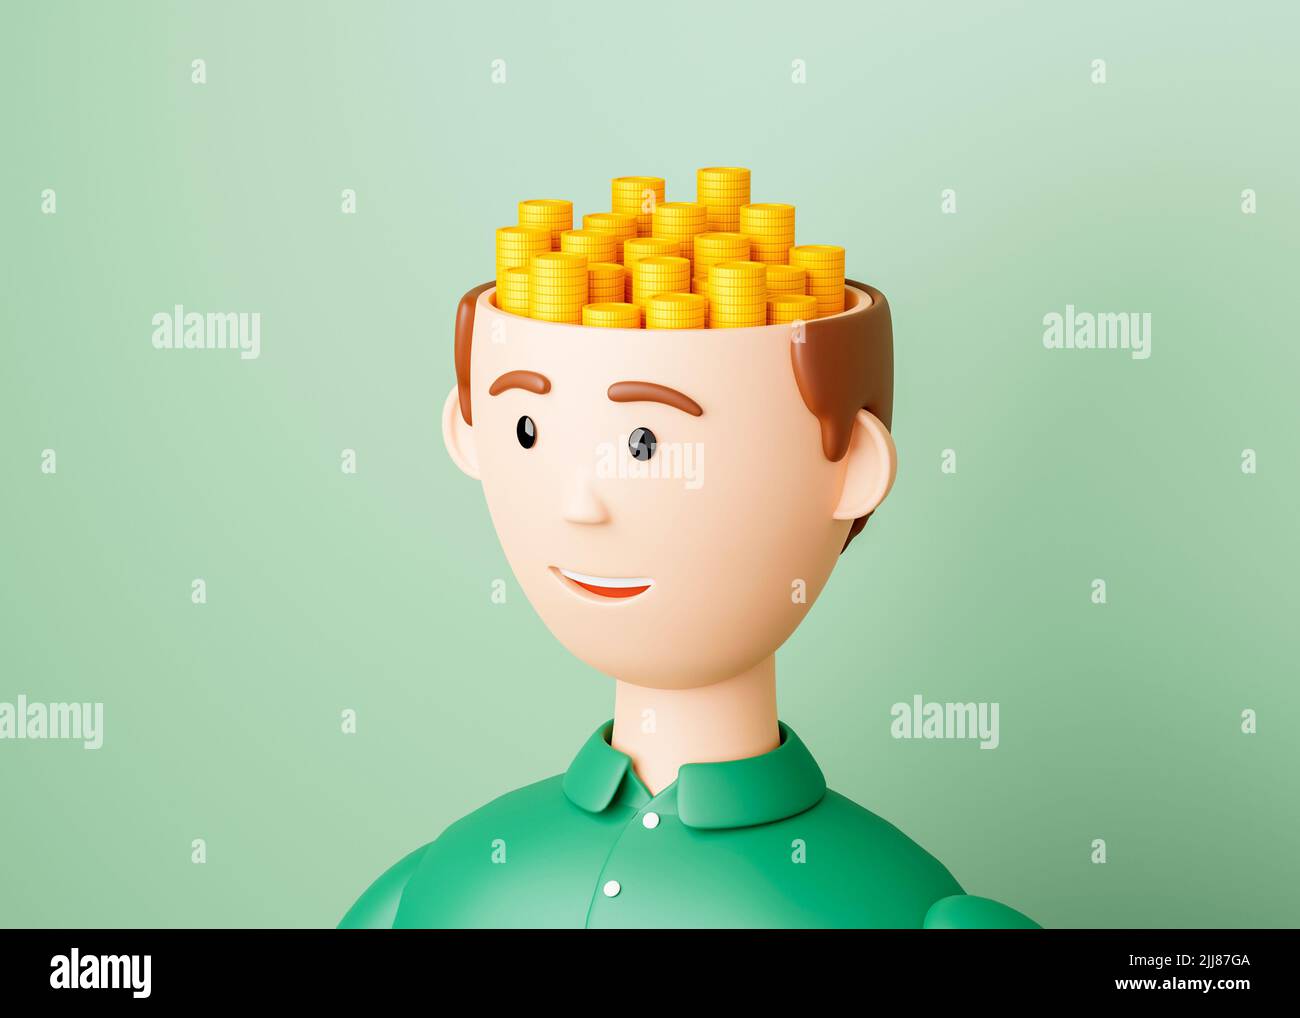 Thoughts about money. The head is full of gold coins. The concept of wealth and success. 3d render. Stock Photo